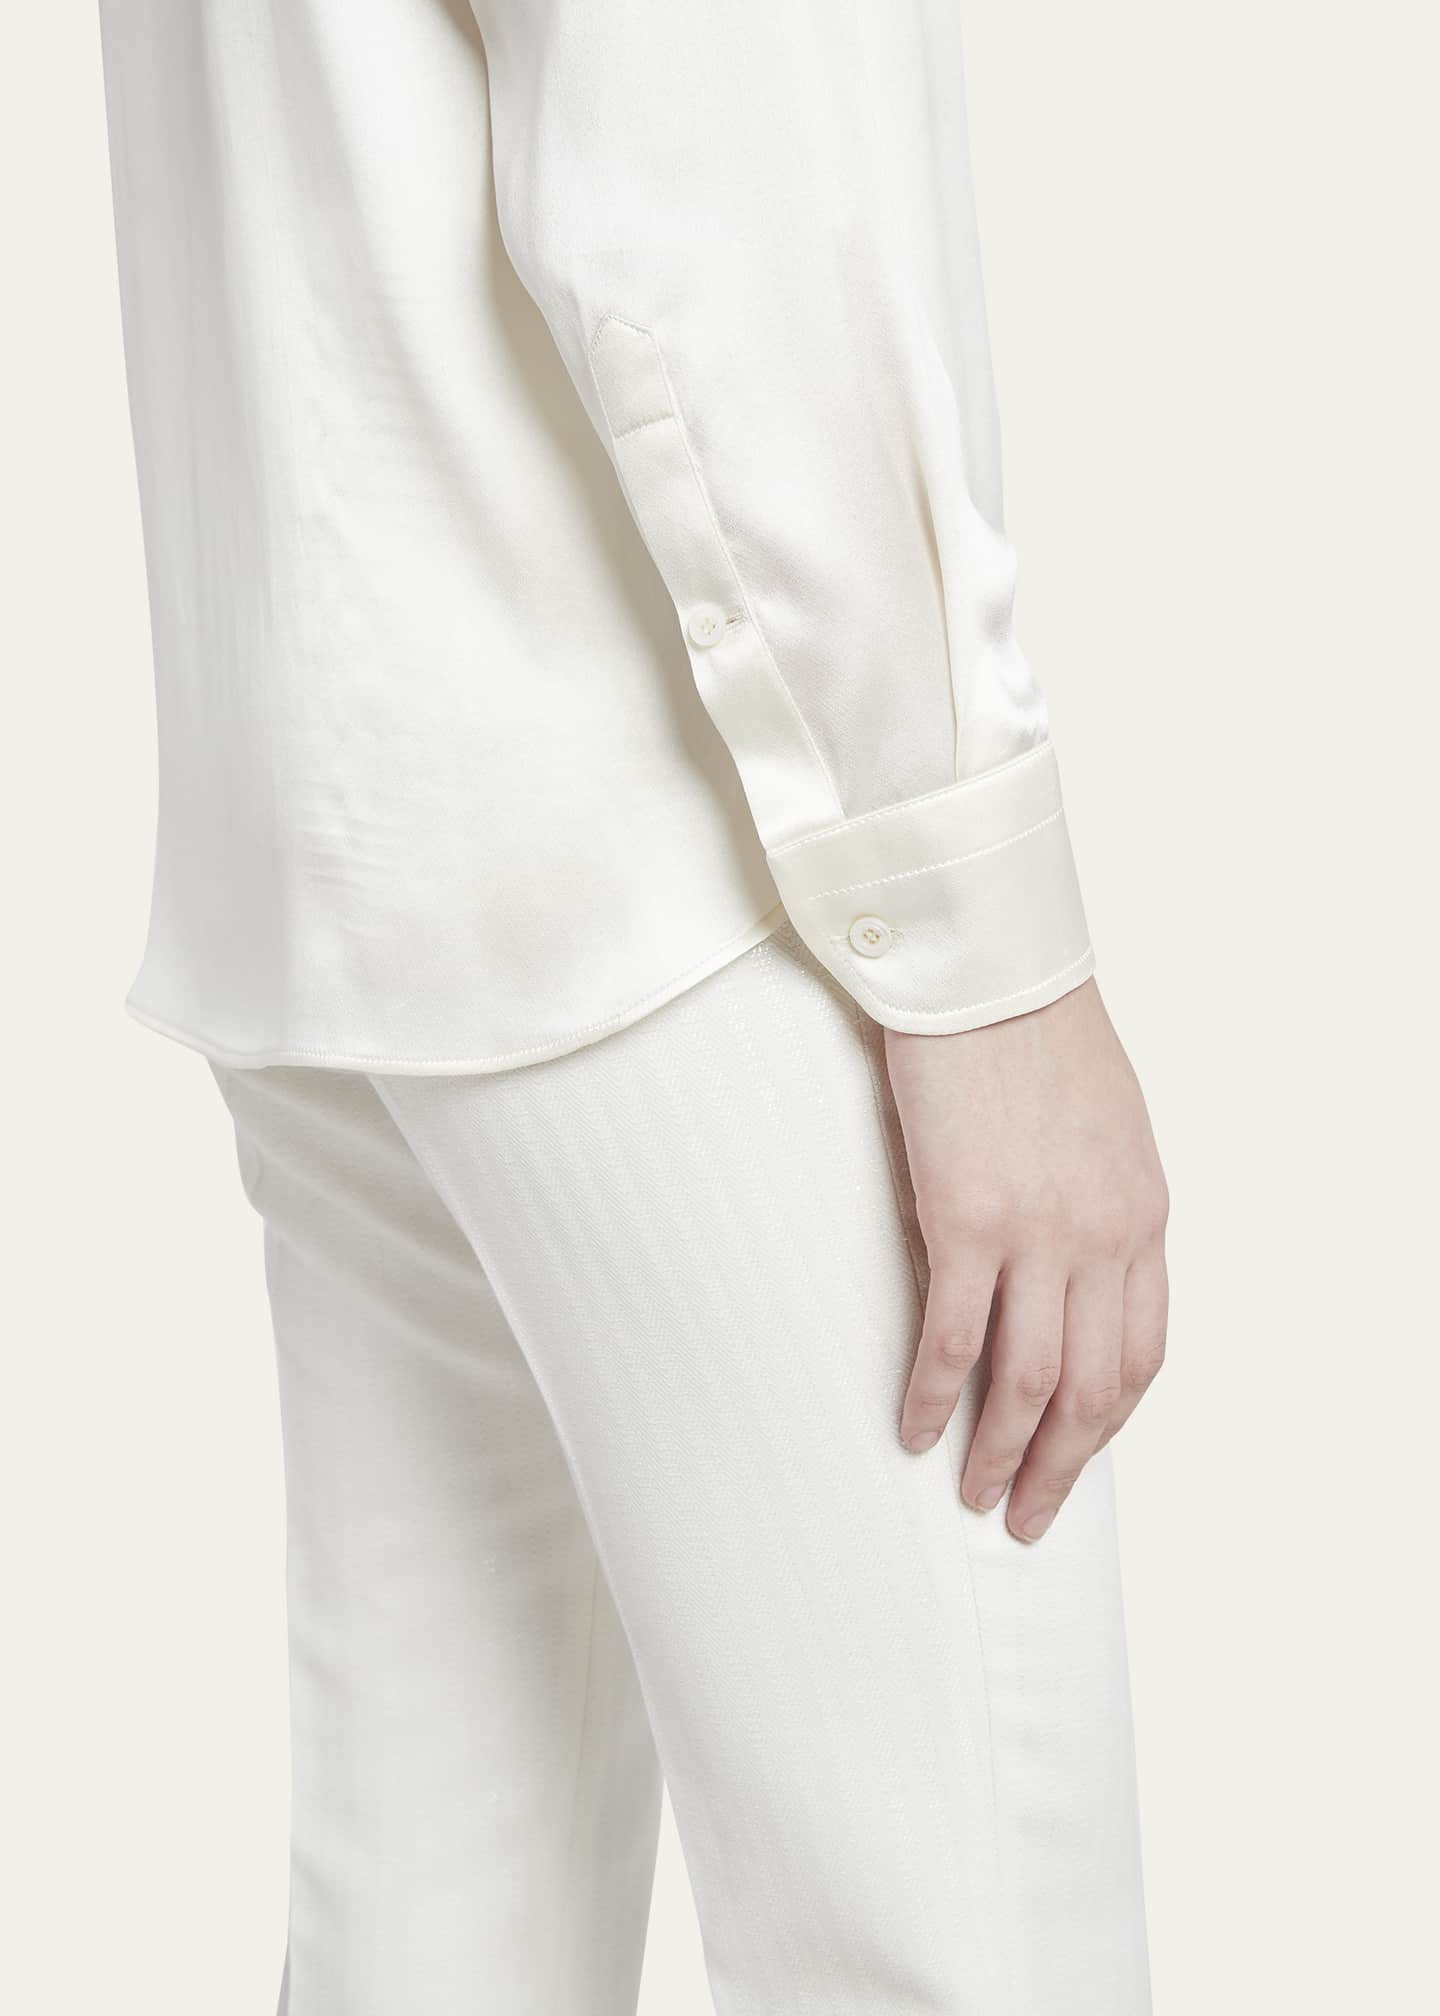 TOM FORD Pleated-Placket Fluid Silk Charmeuse Collared Shirt - Bergdorf ...